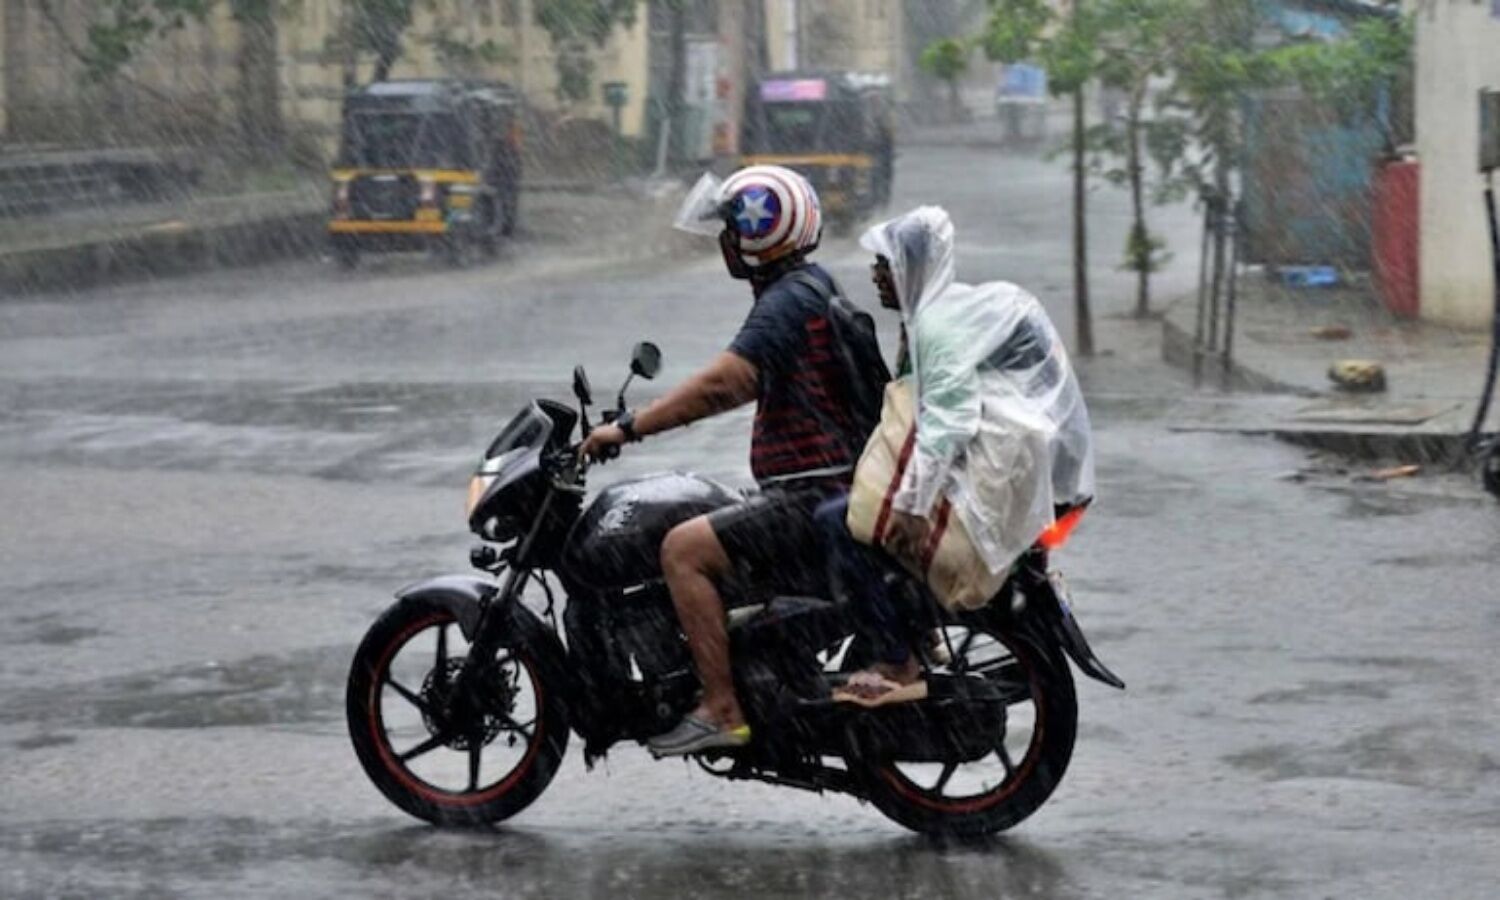 Weather Today: Heavy rain warning in UP and Uttarakhand today, alert in many more states too